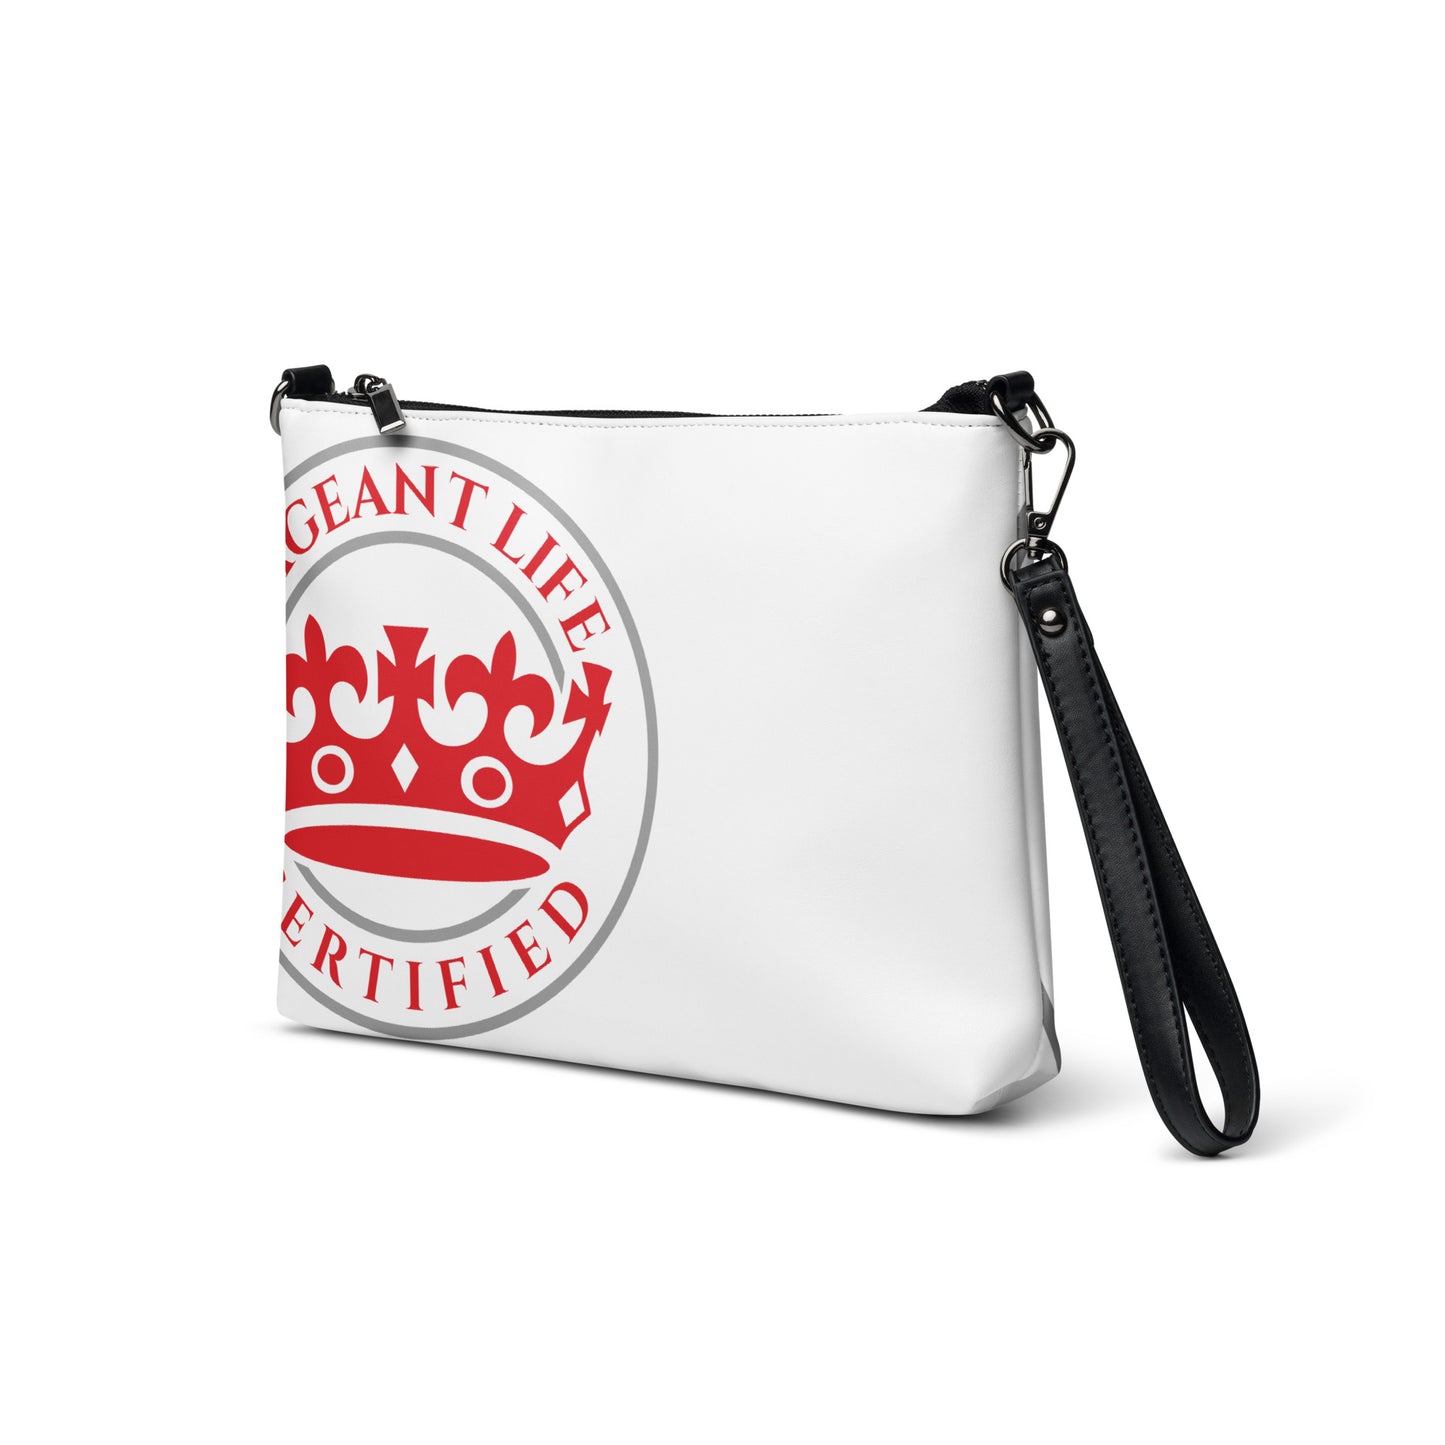 Red Silver and White Pageant Life Certified Crossbody bag